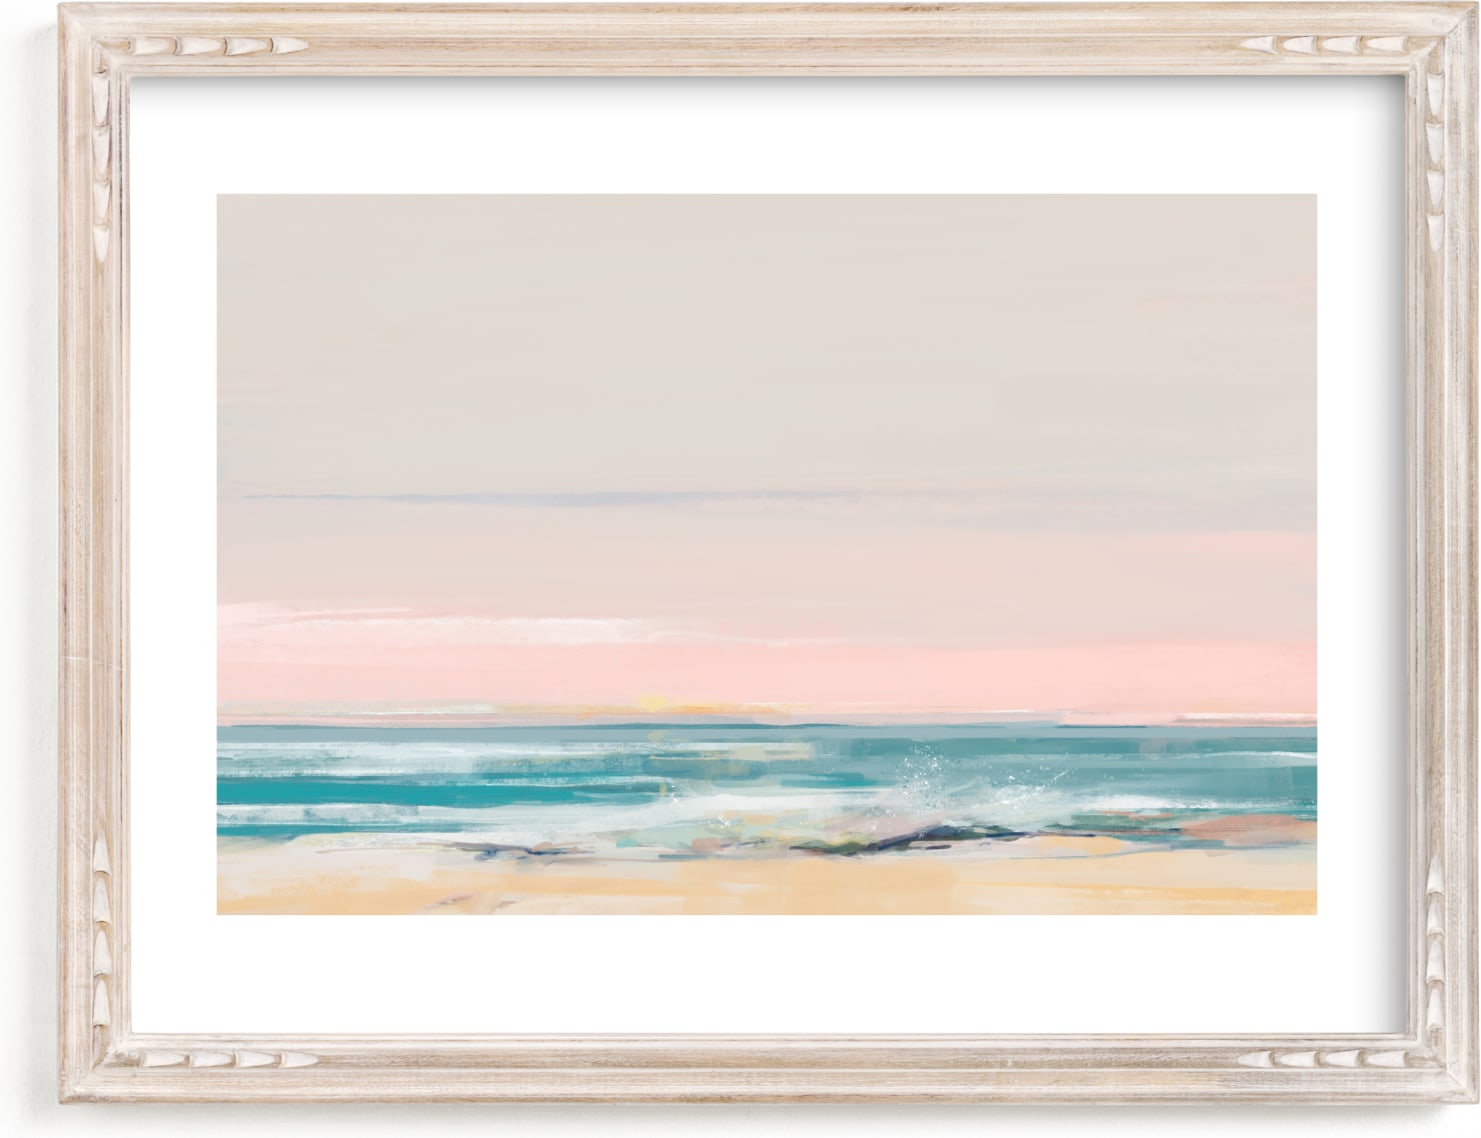 This is a blue, pink, beige art by Eric Ransom called beach impressions.